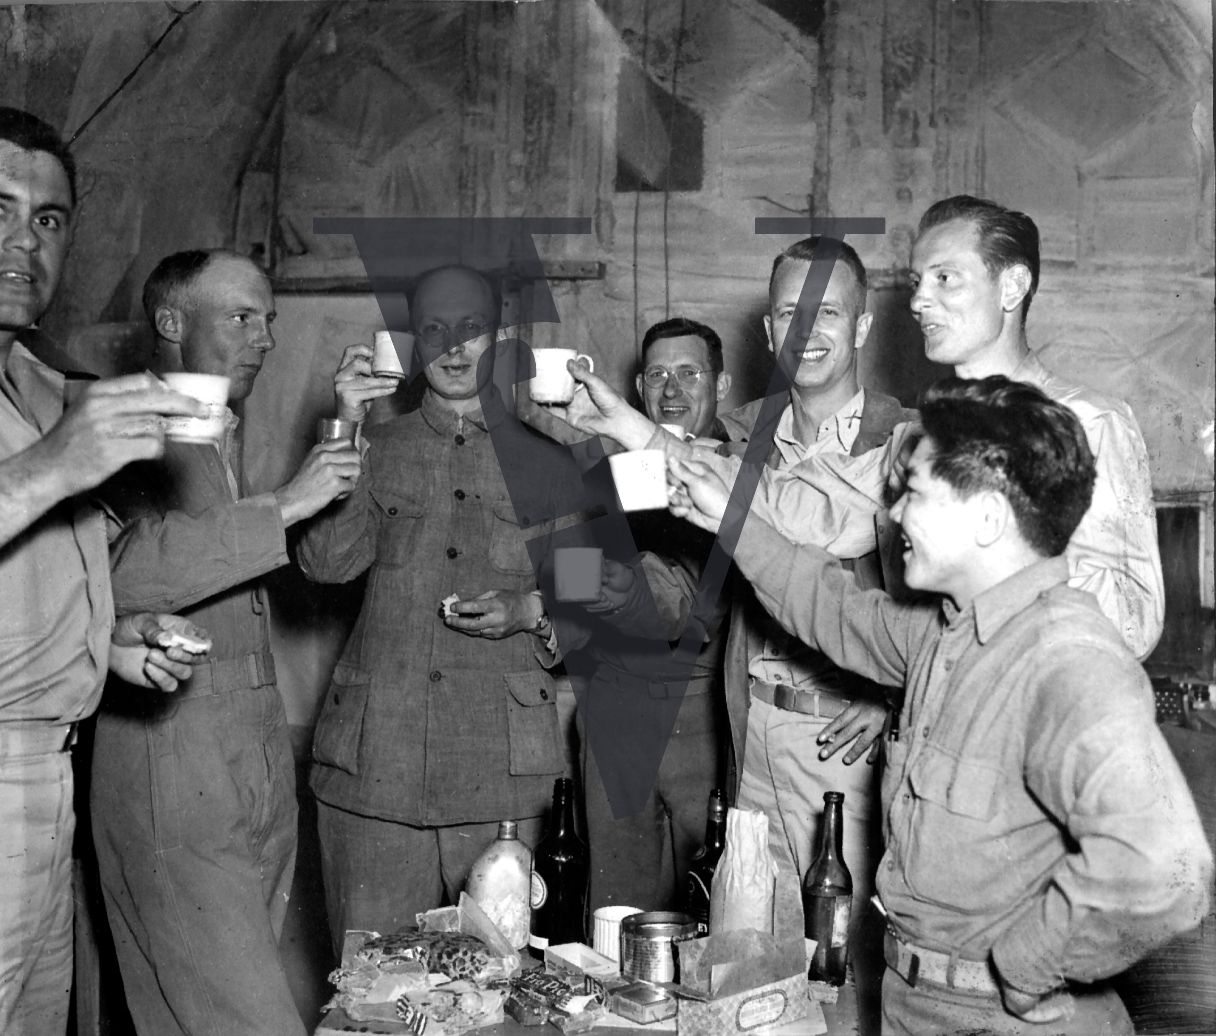 China, Yenan, US officials making a toast, portrait.